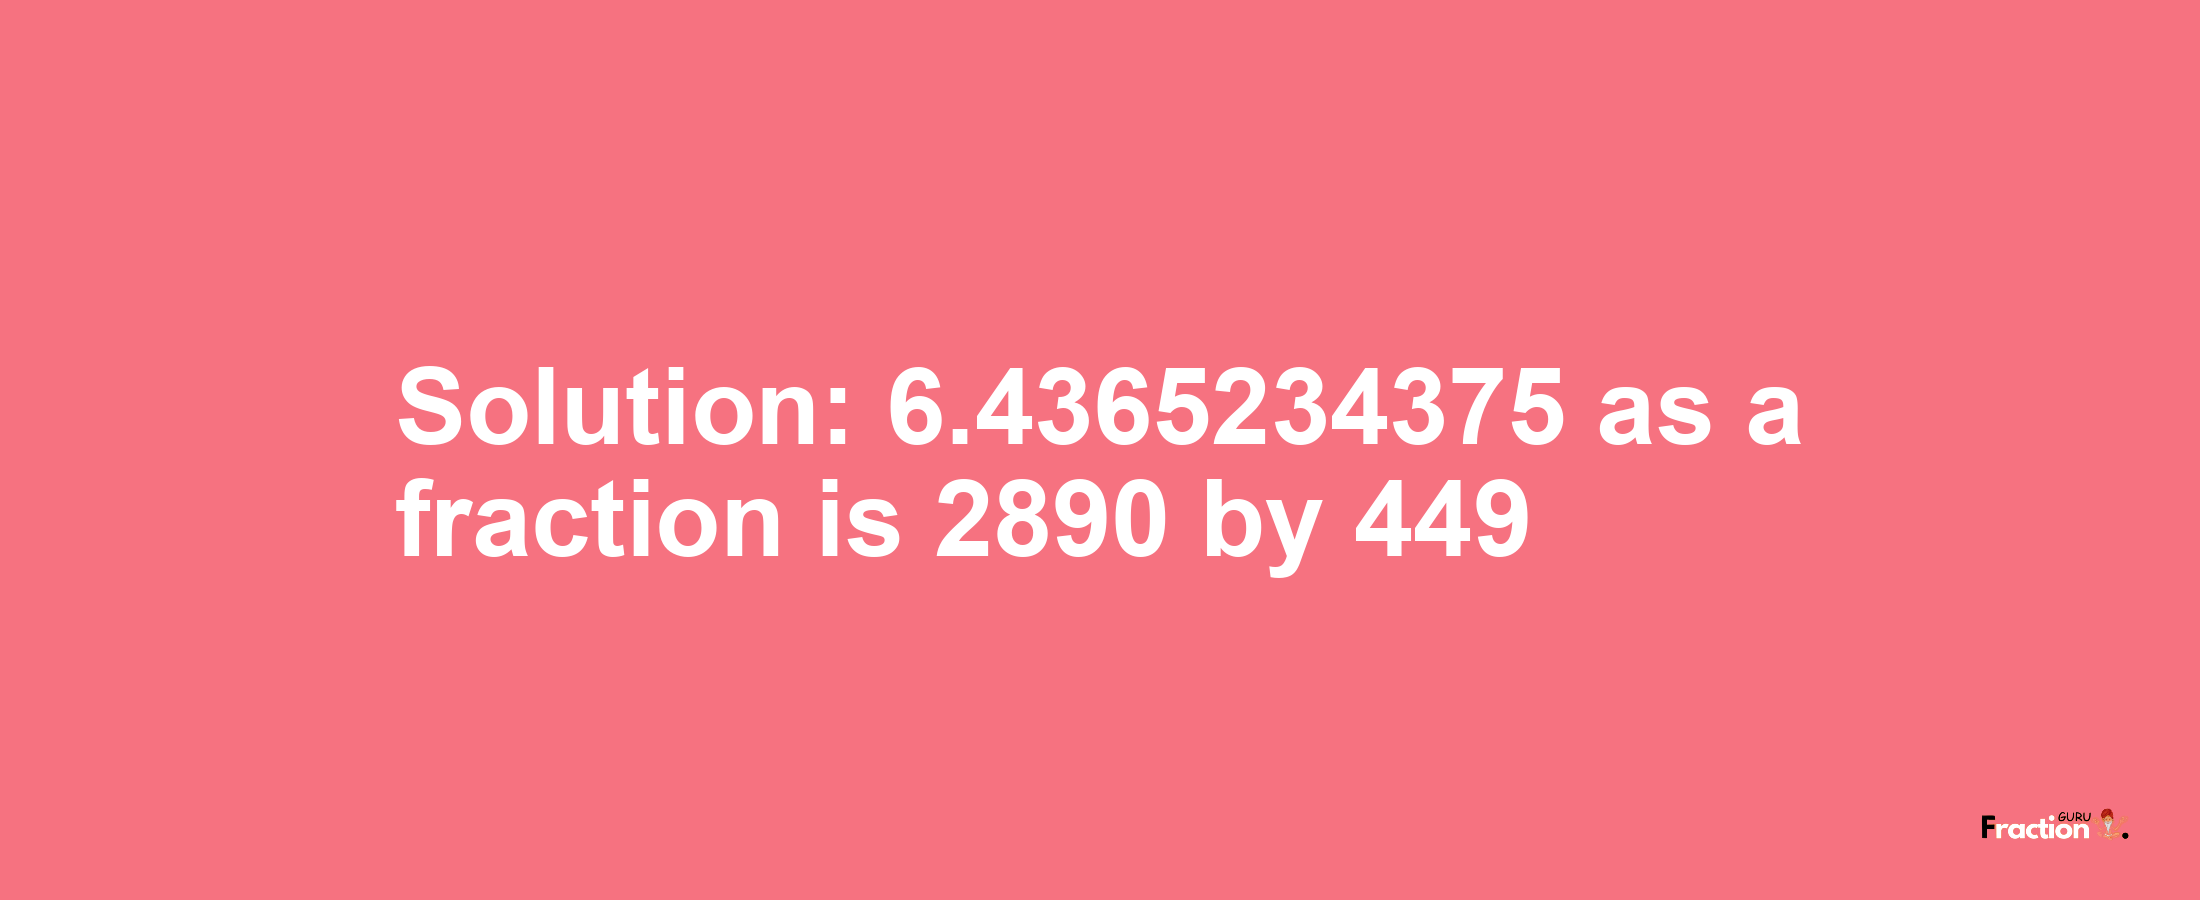 Solution:6.4365234375 as a fraction is 2890/449